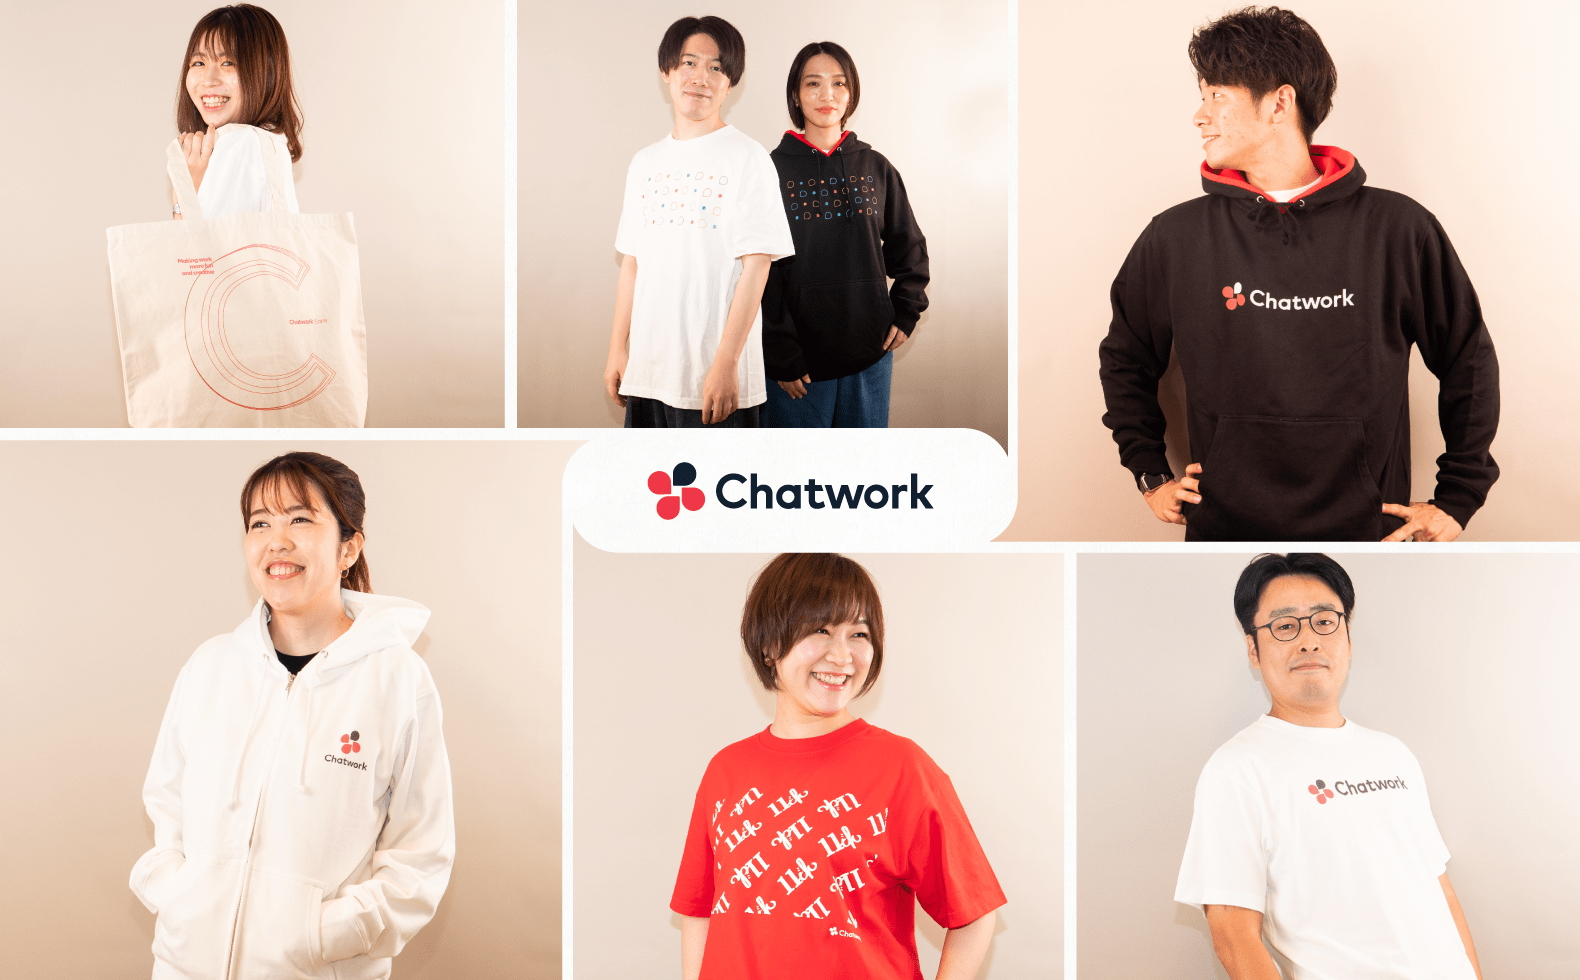 Chatwork STOREアップデート！